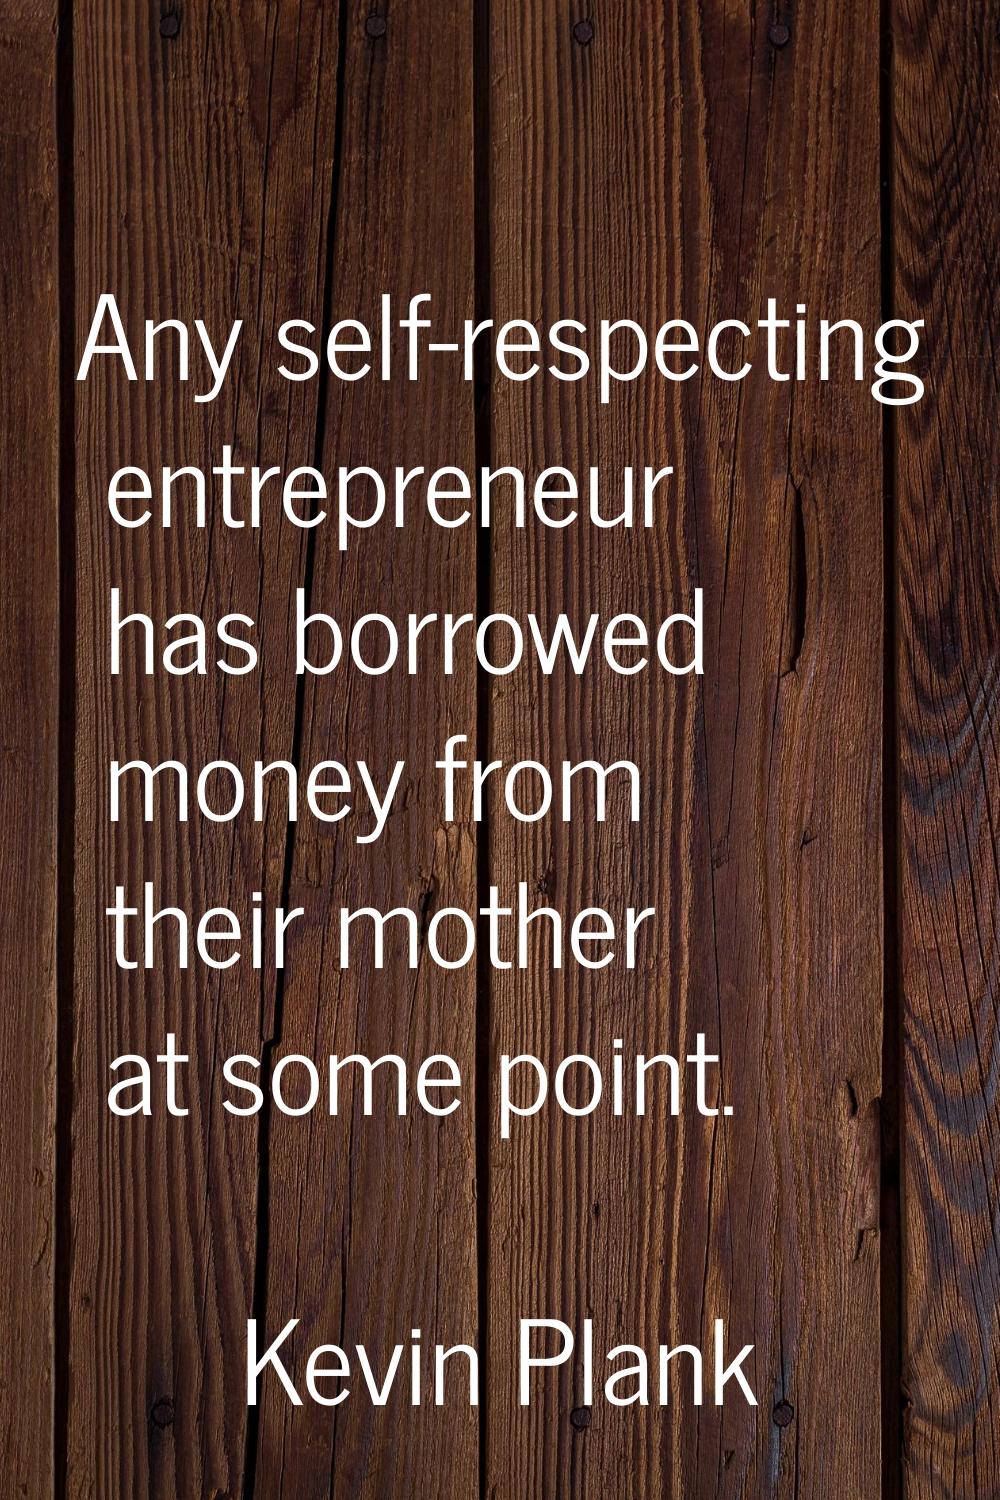 Any self-respecting entrepreneur has borrowed money from their mother at some point.